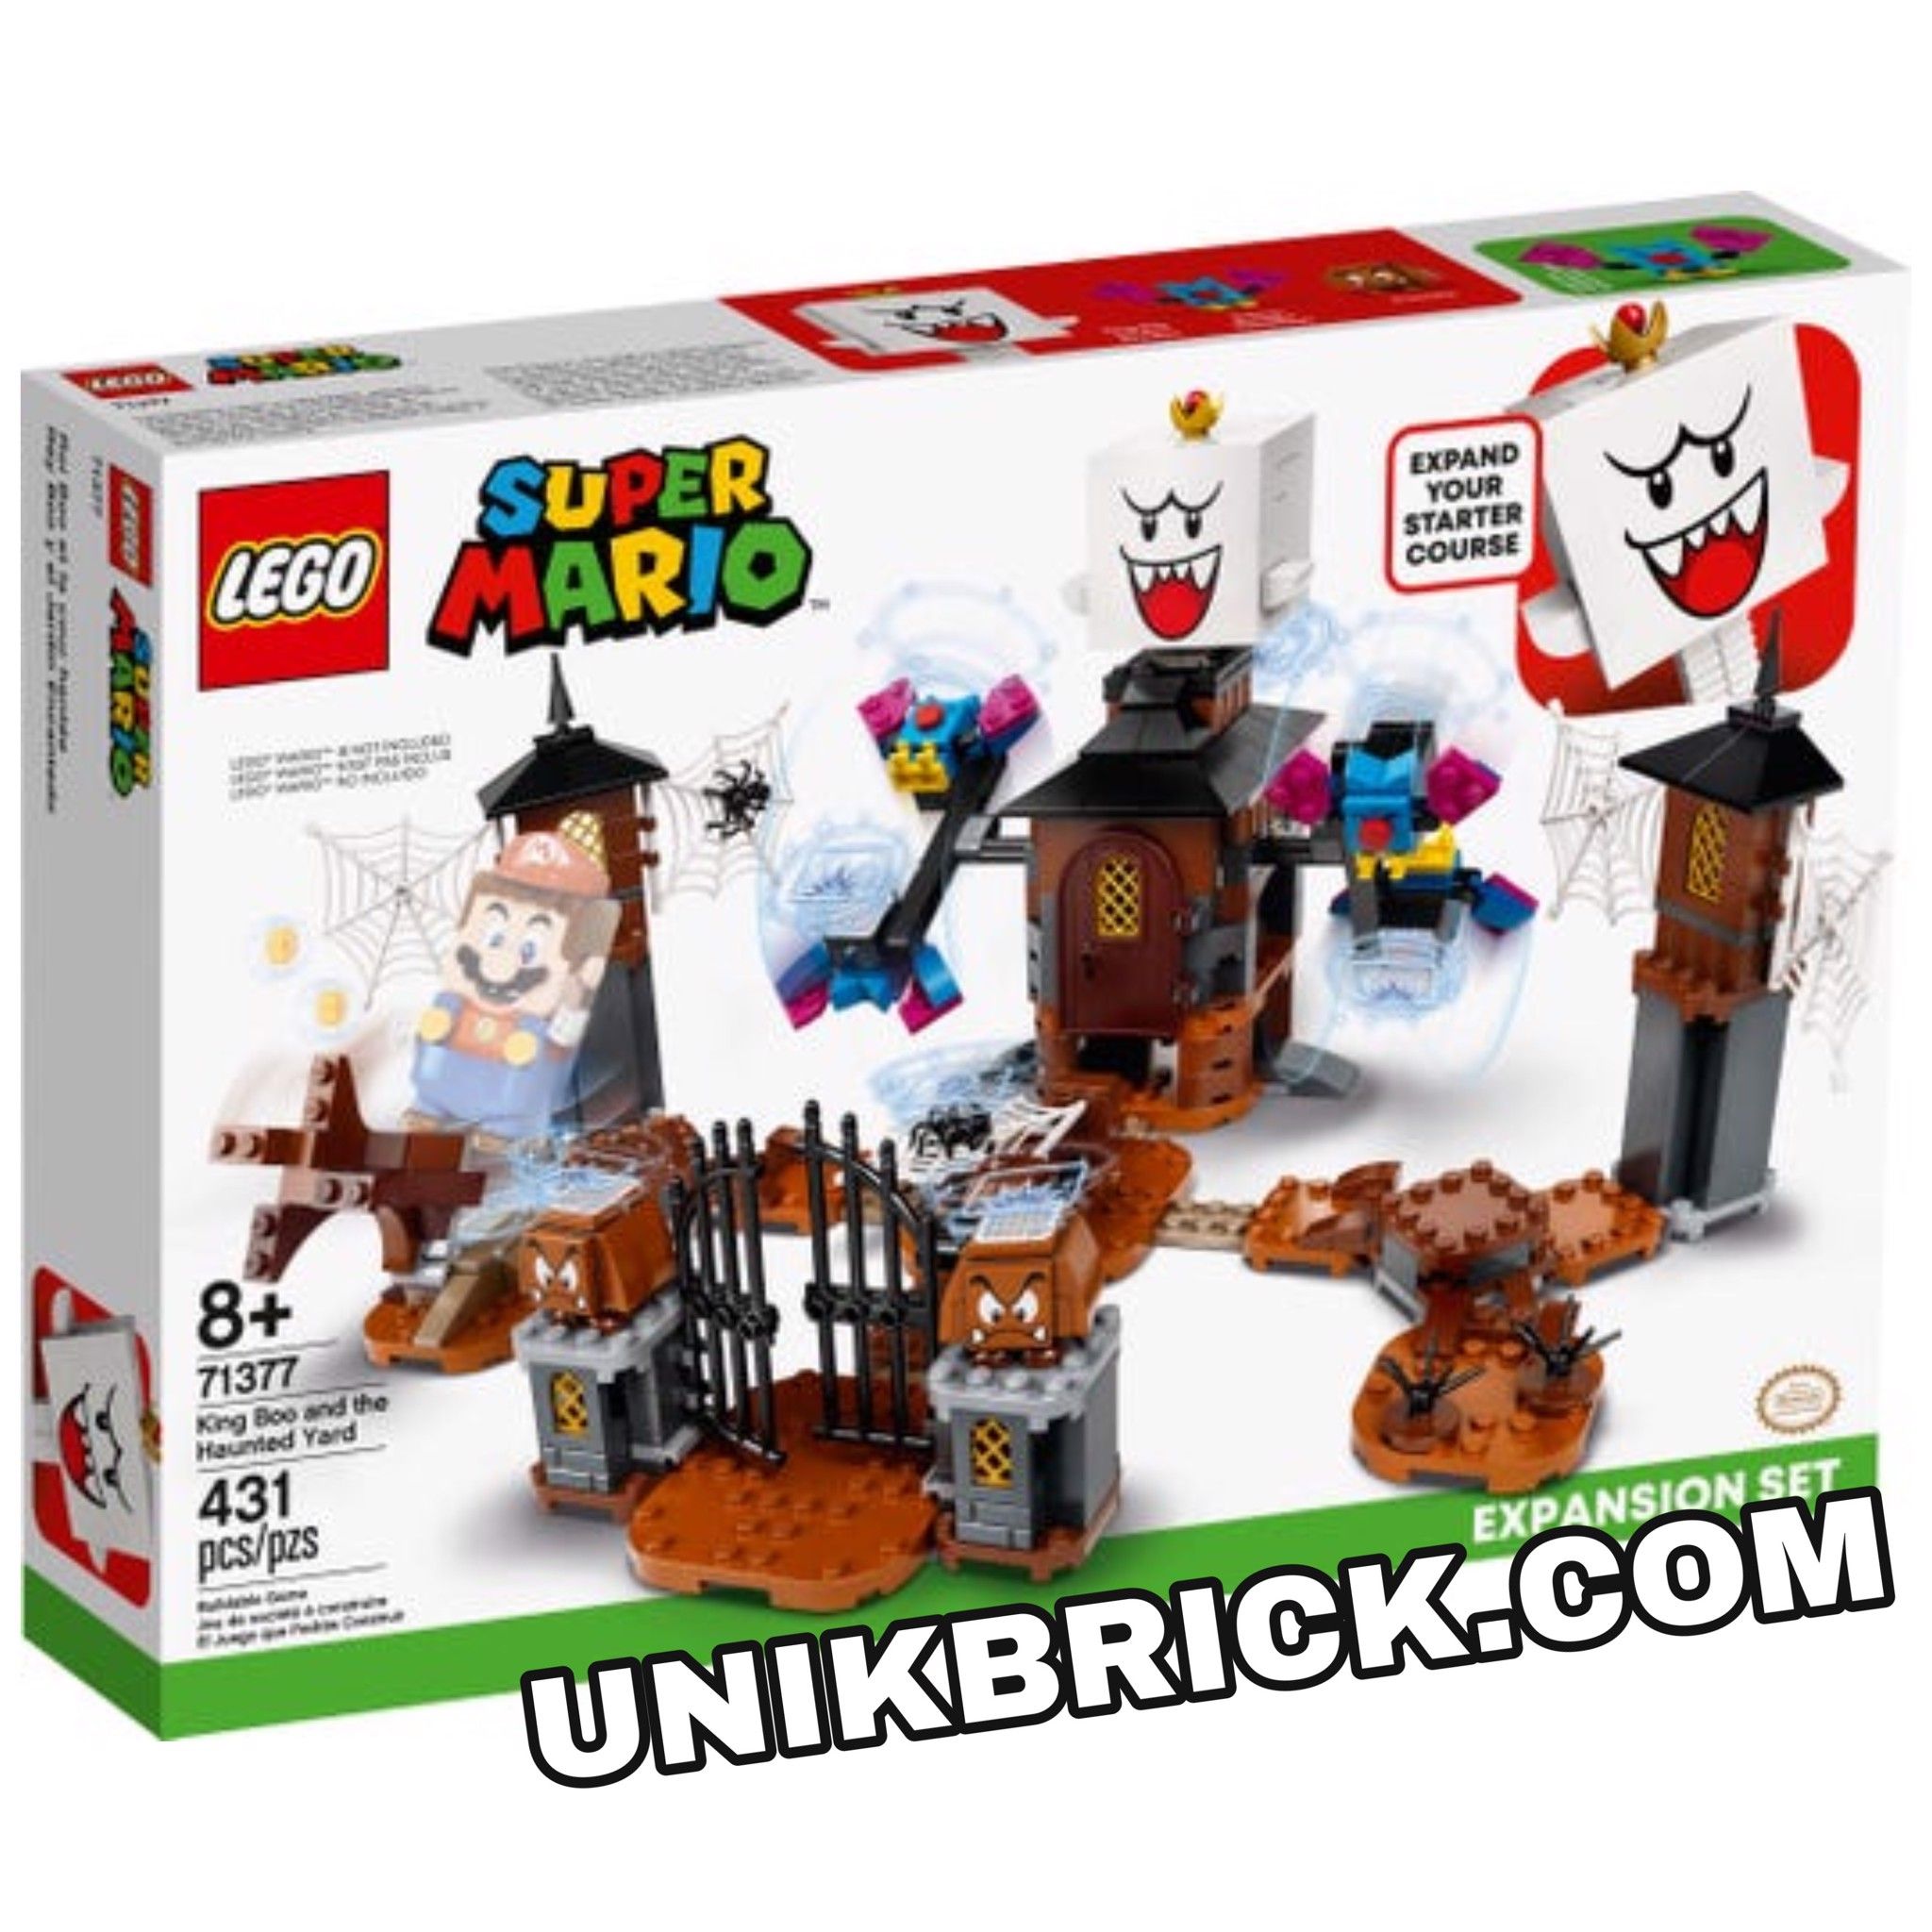 [HÀNG ĐẶT/ ORDER] LEGO Super Mario 71377 King Boo and the Haunted Yard Expansion Set